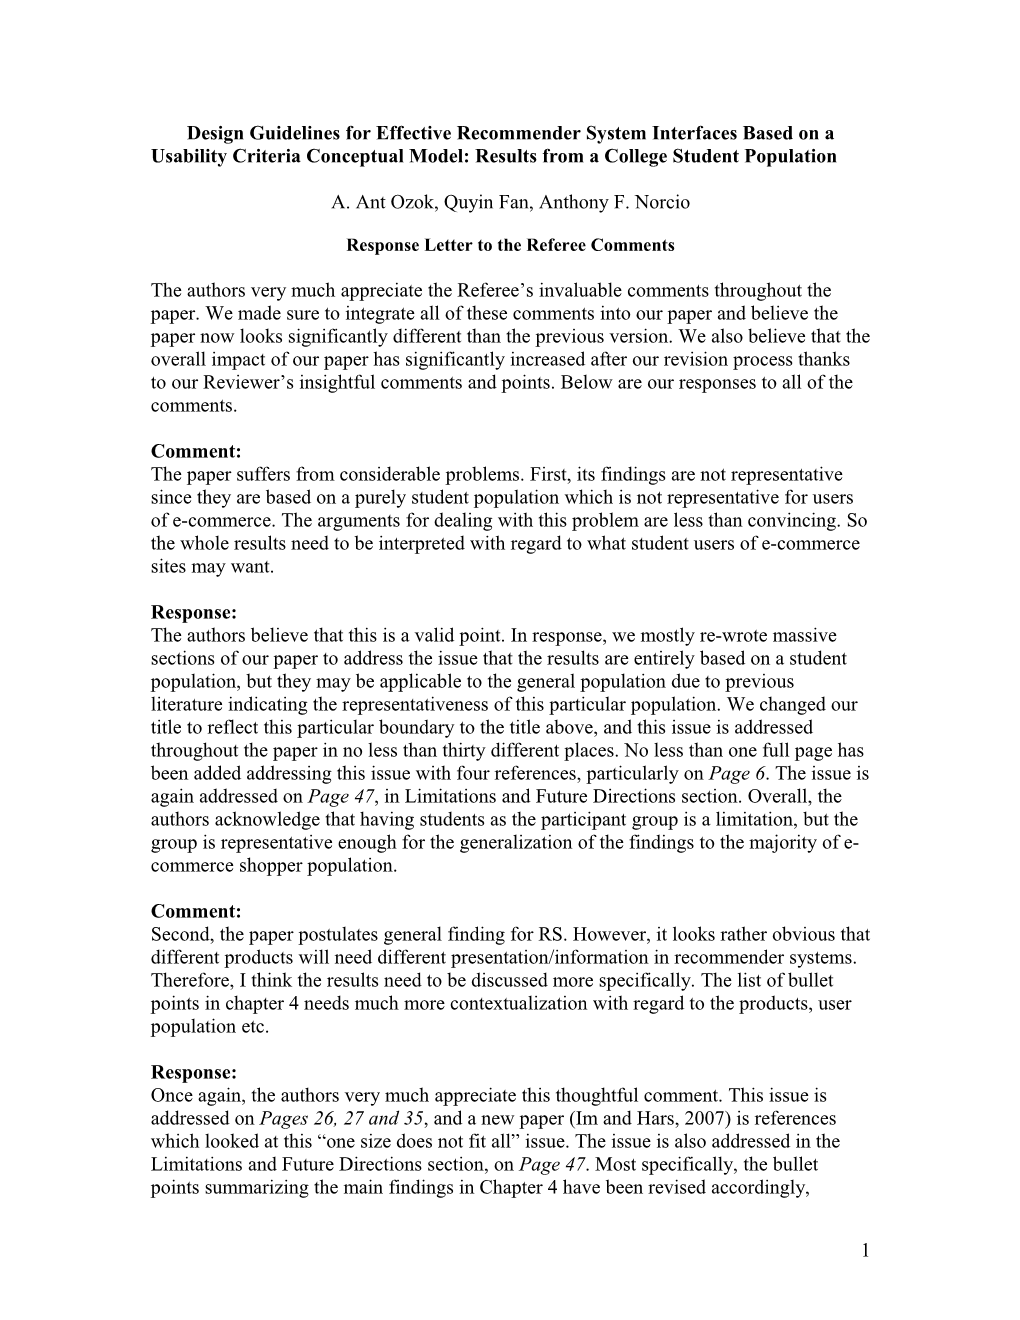 Design Guidelines for Effective Recommender System Interfaces Based on A